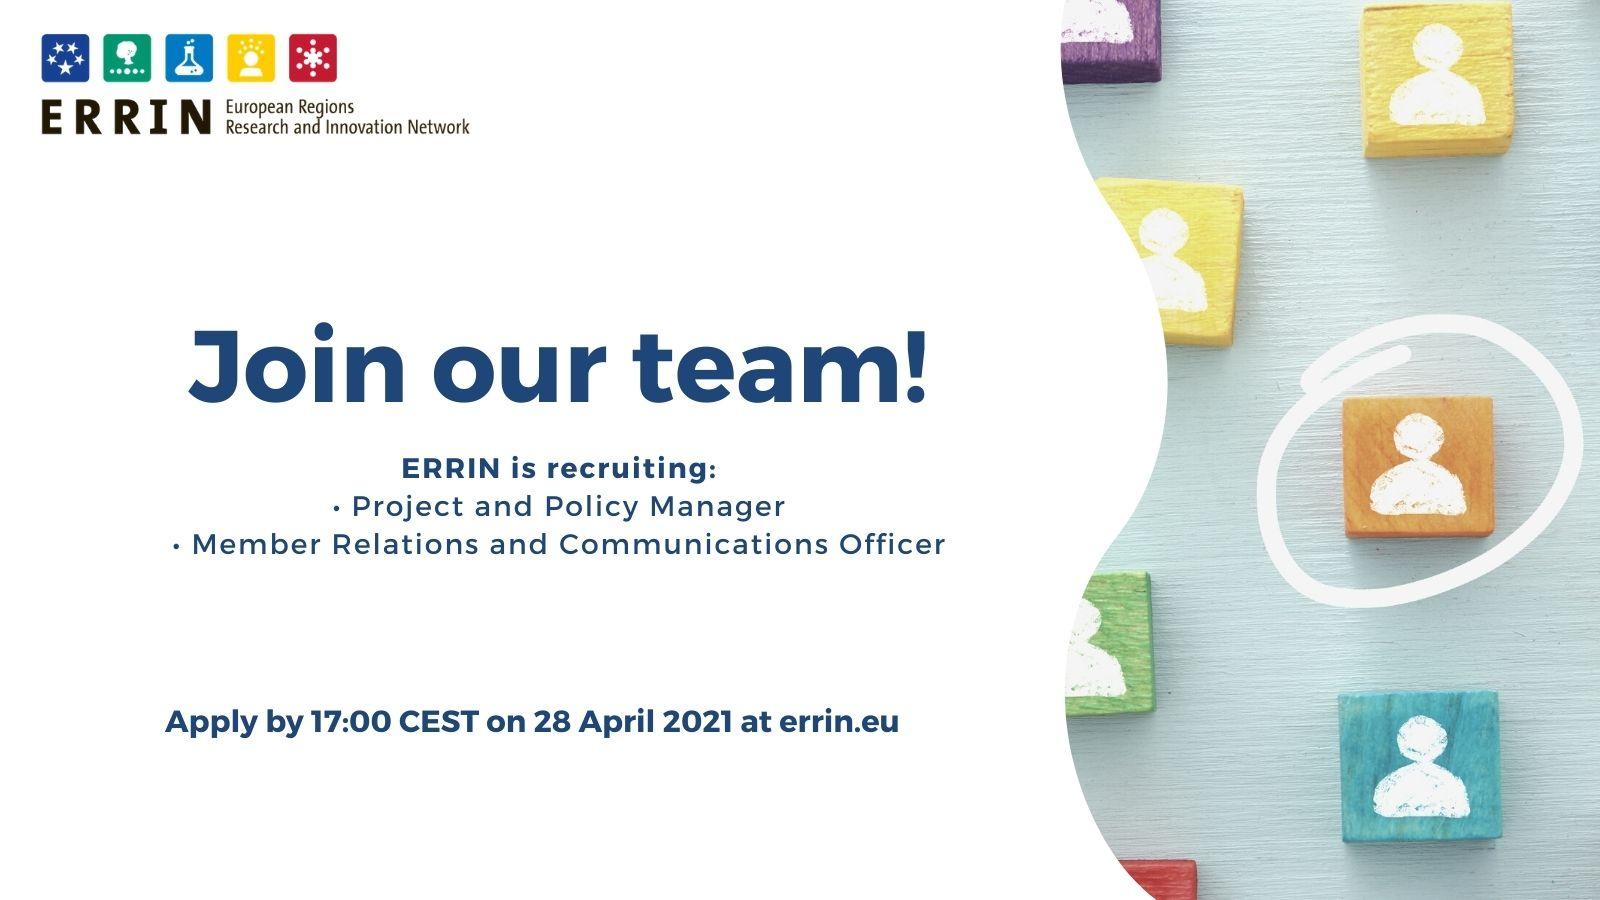 ERRIN is looking for Project and Policy Manager (deadline: 28 April)